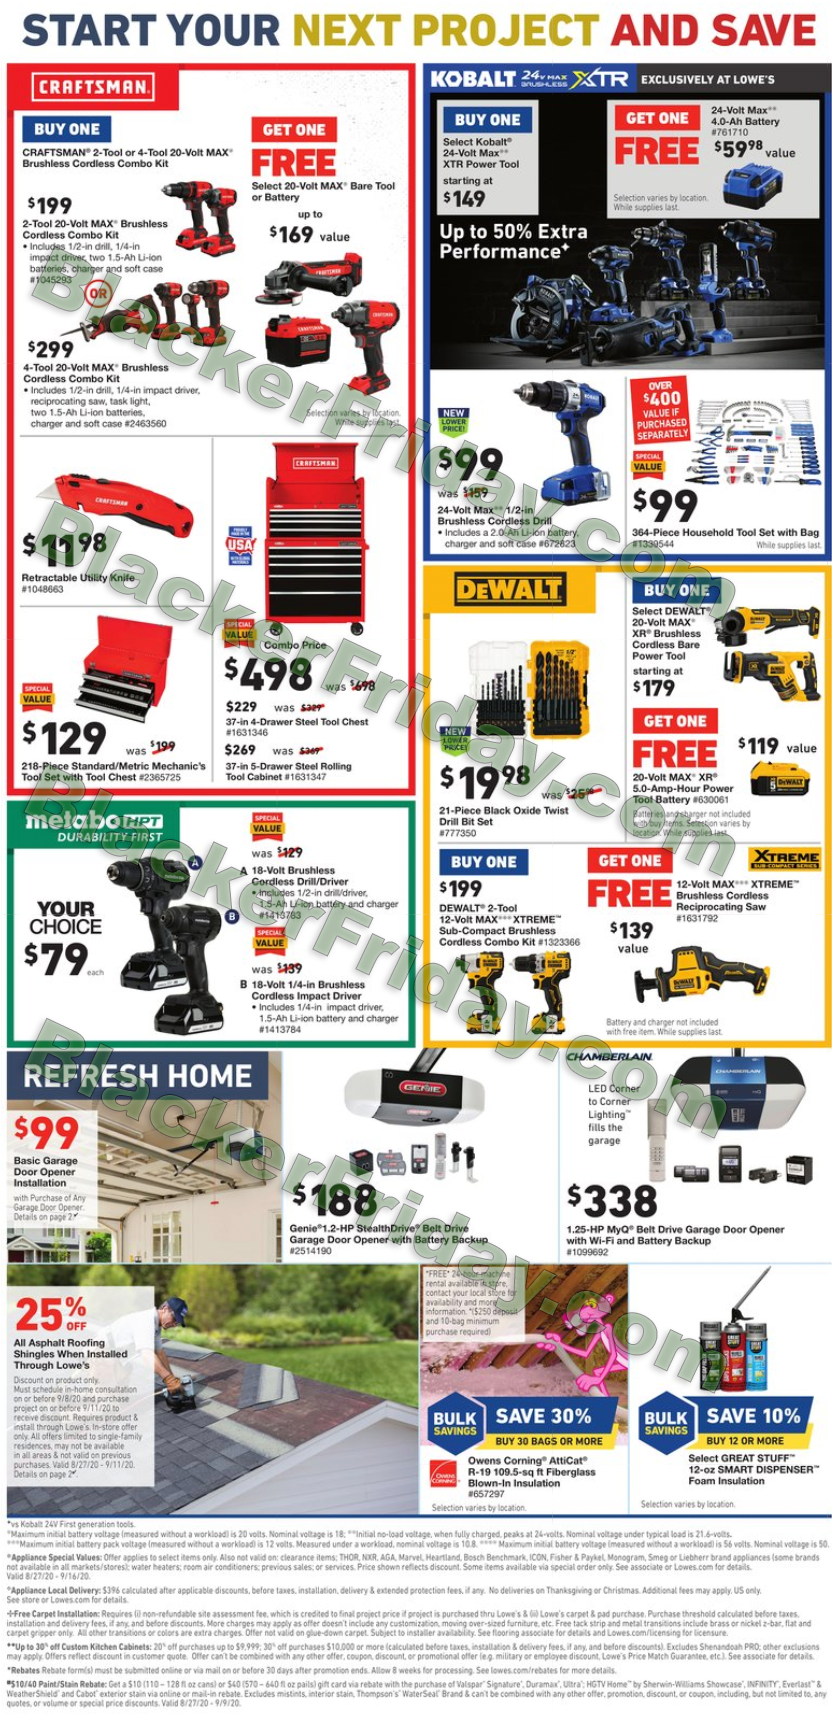 Lowe's Labor Day Sale 2021 What to Expect Blacker Friday